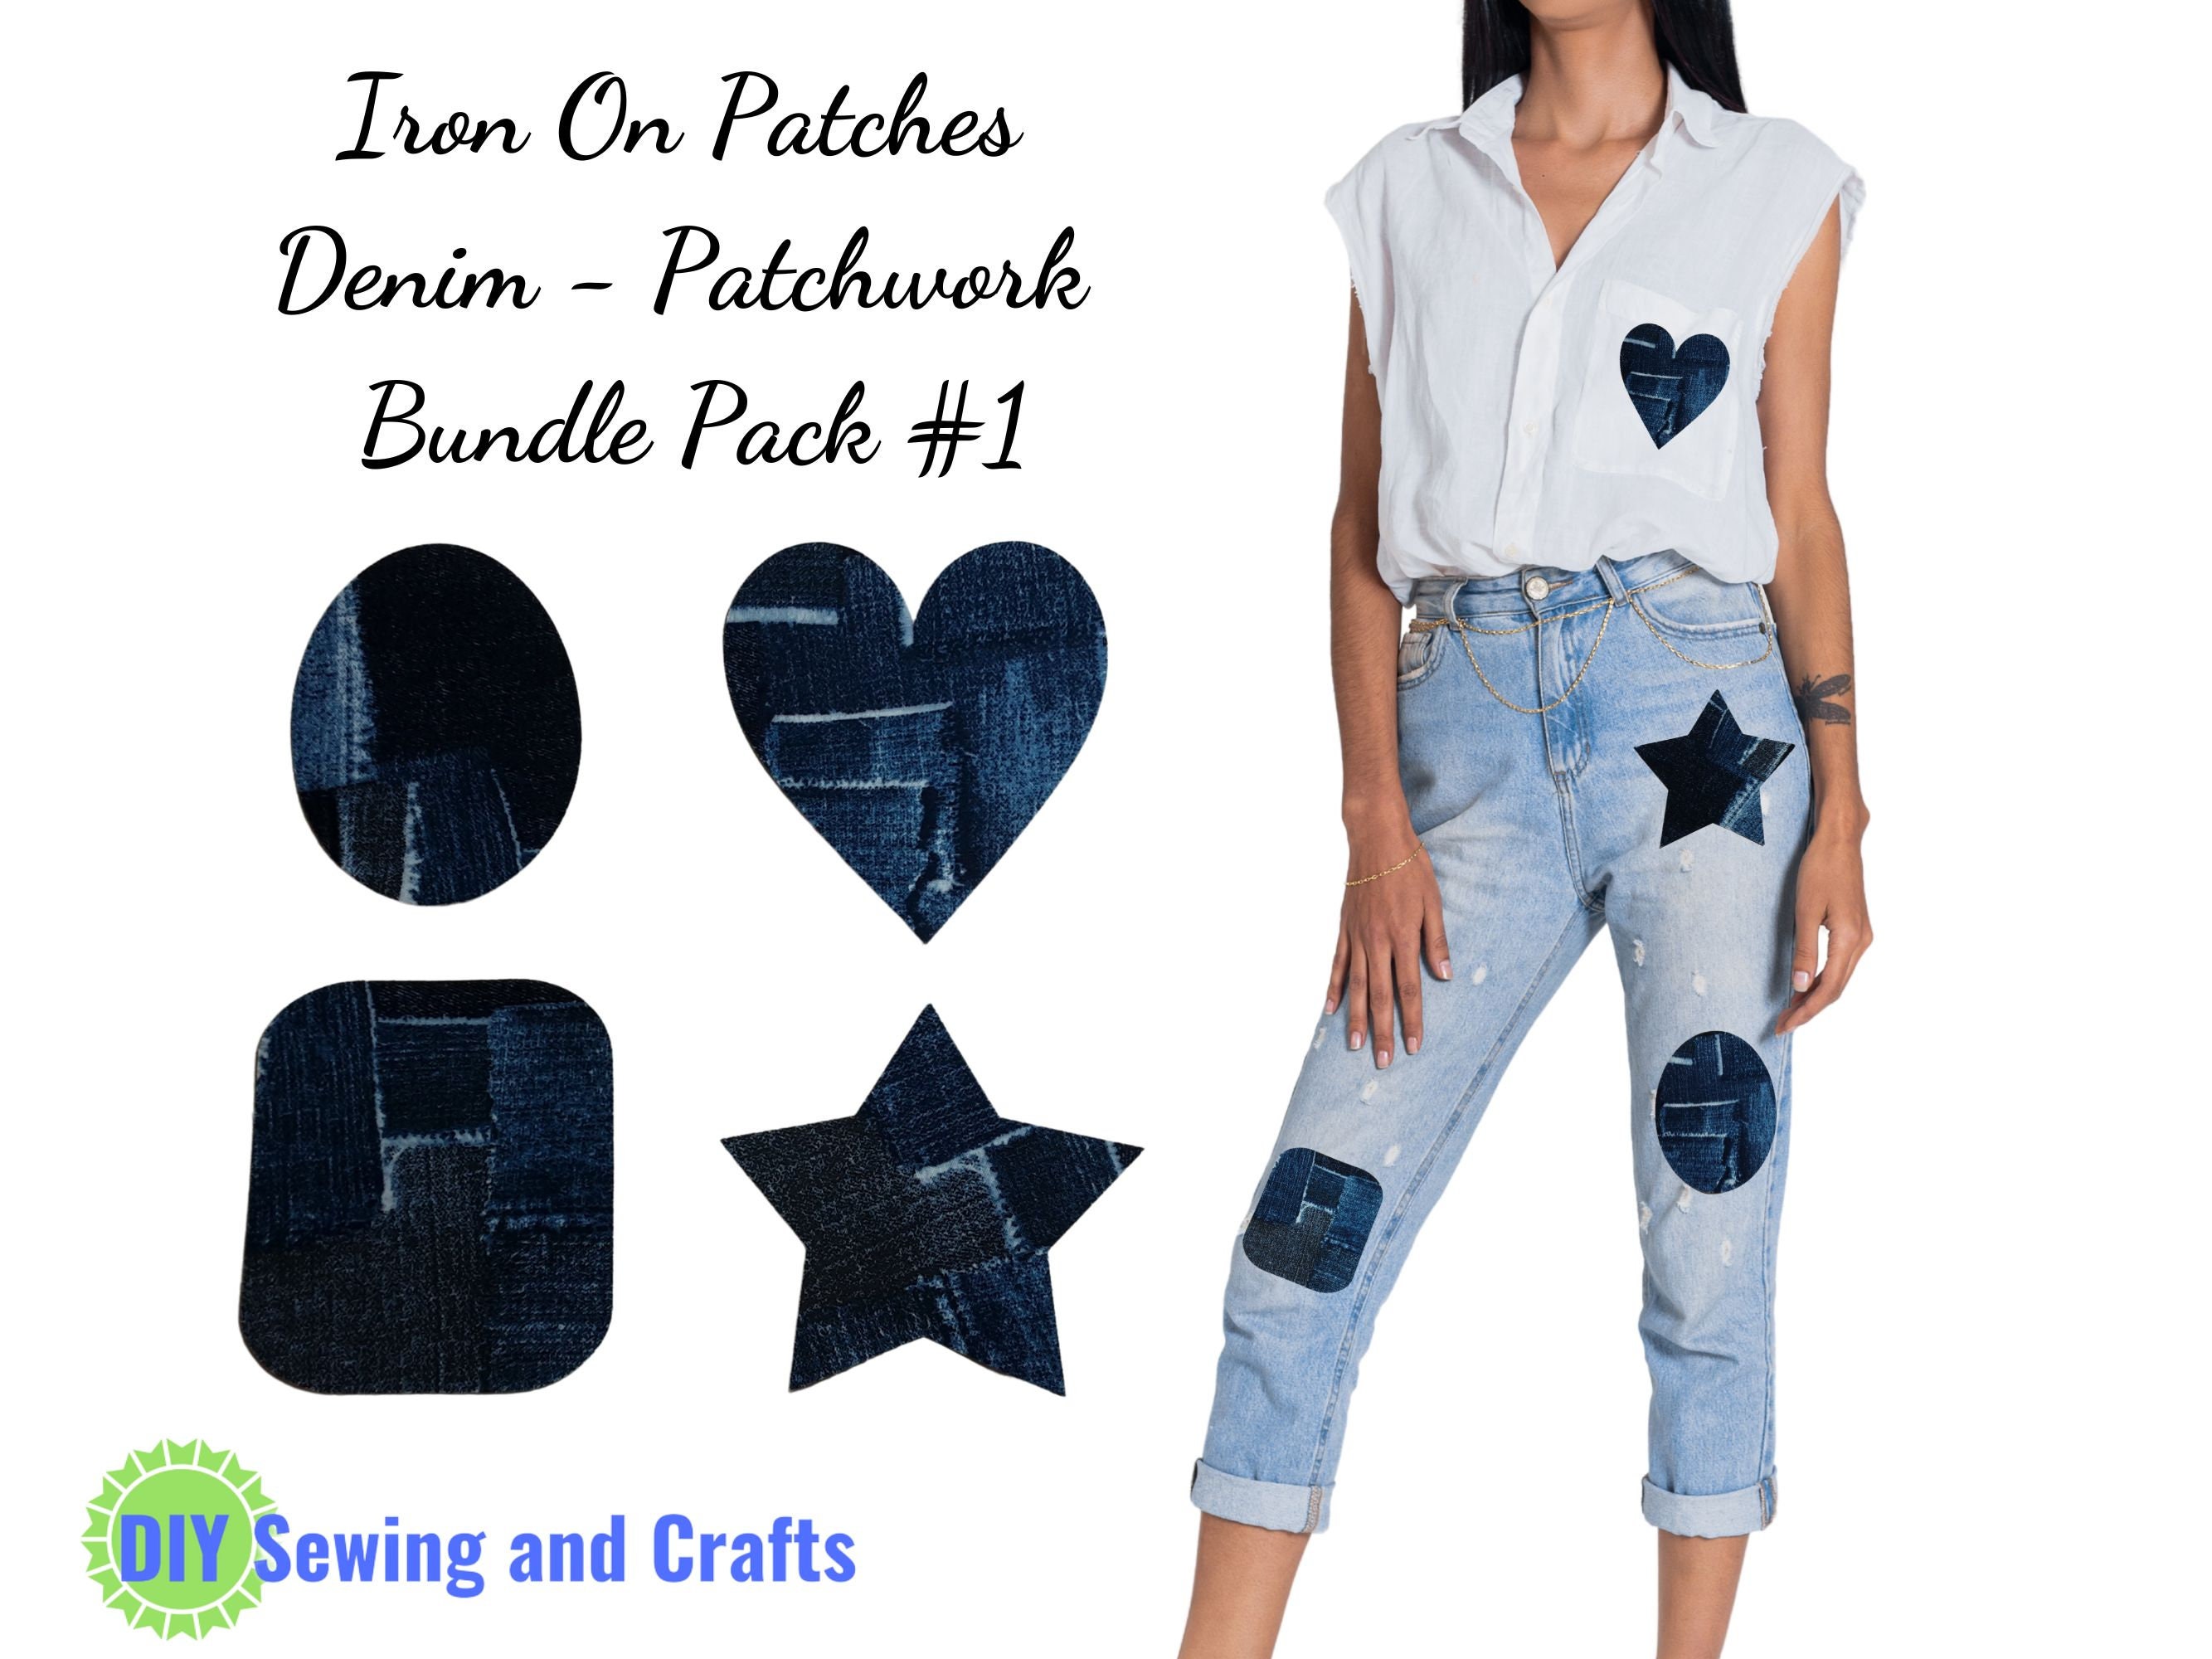 12PCS Iron On Patches for Clothing Jeans, Denim Iron-On Jean Patches  Assorted Cotton Jeans Repair Kit Ideal for Repairing, Decorating,  Reinforcing (4.9 X 3.7) 